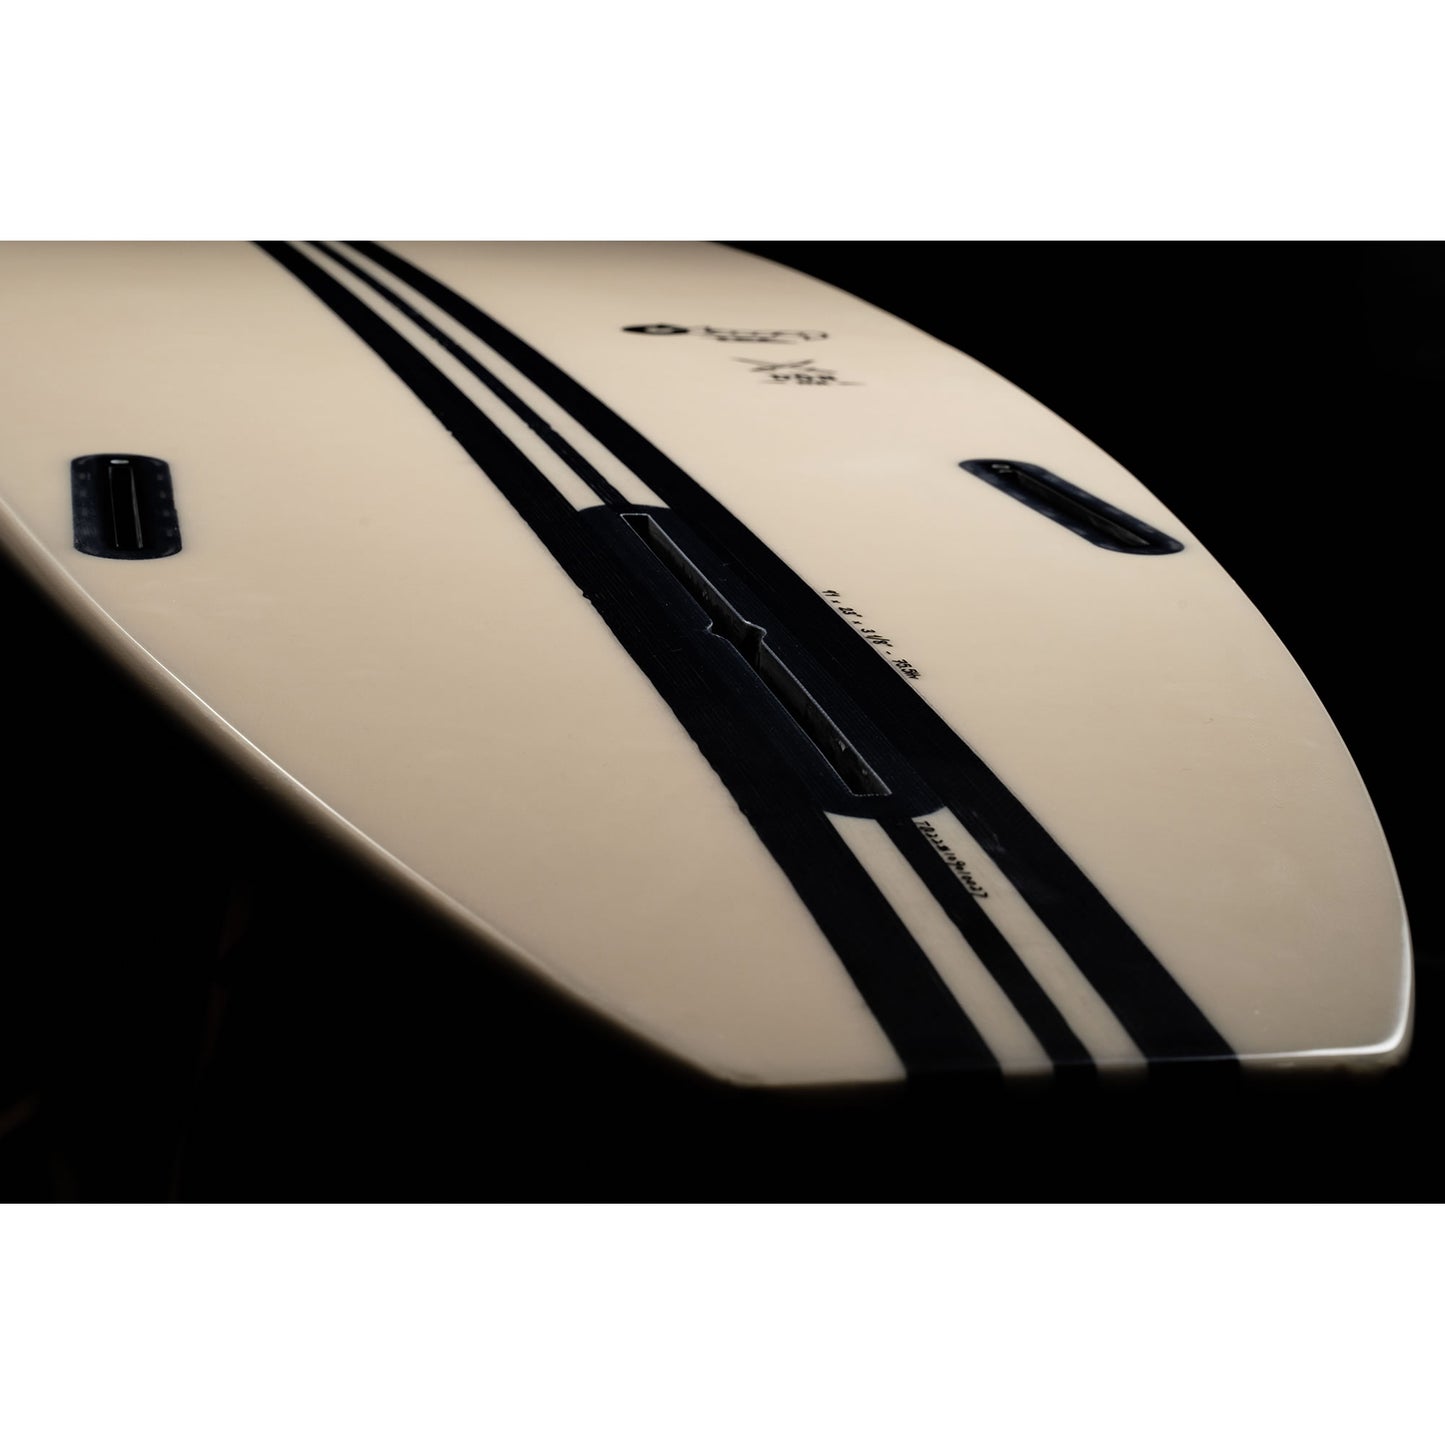 Torq 9'1 ACT The Don Nose Rider Surfboard Black Rail Bamboo